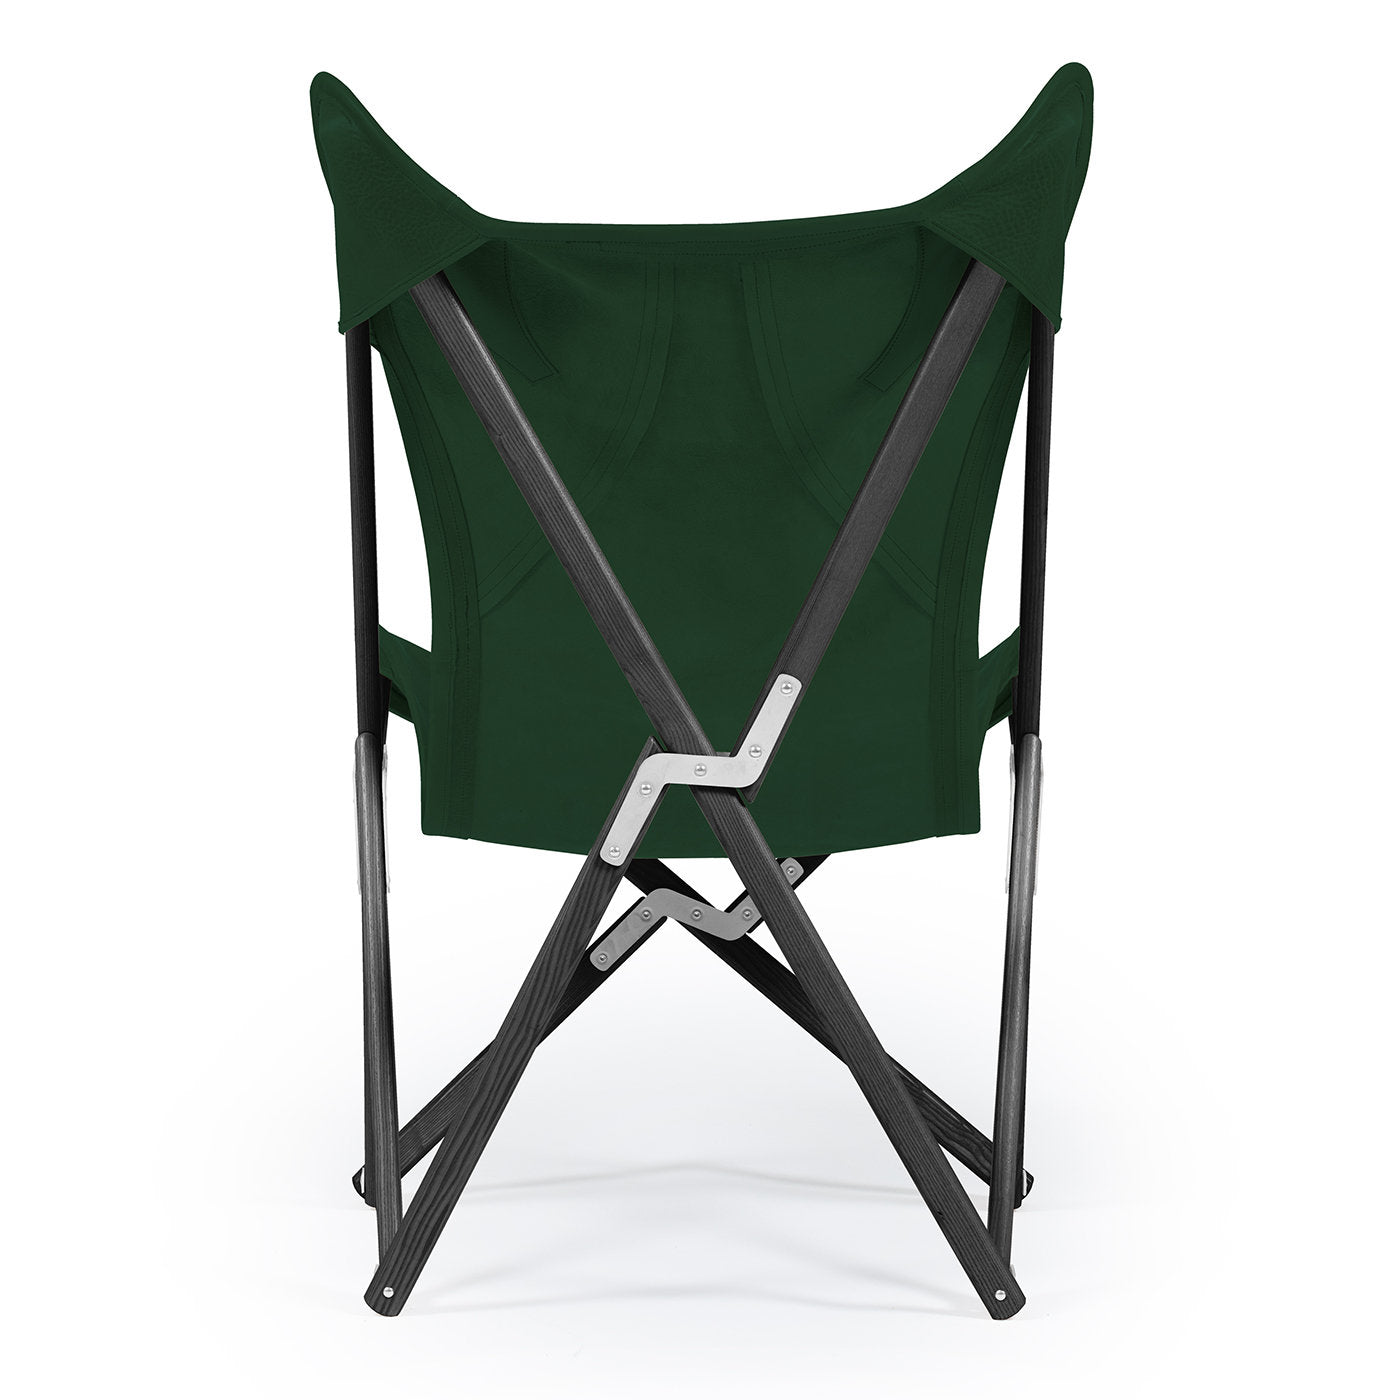 Tripolina Armchair in Green Leather - Alternative view 2